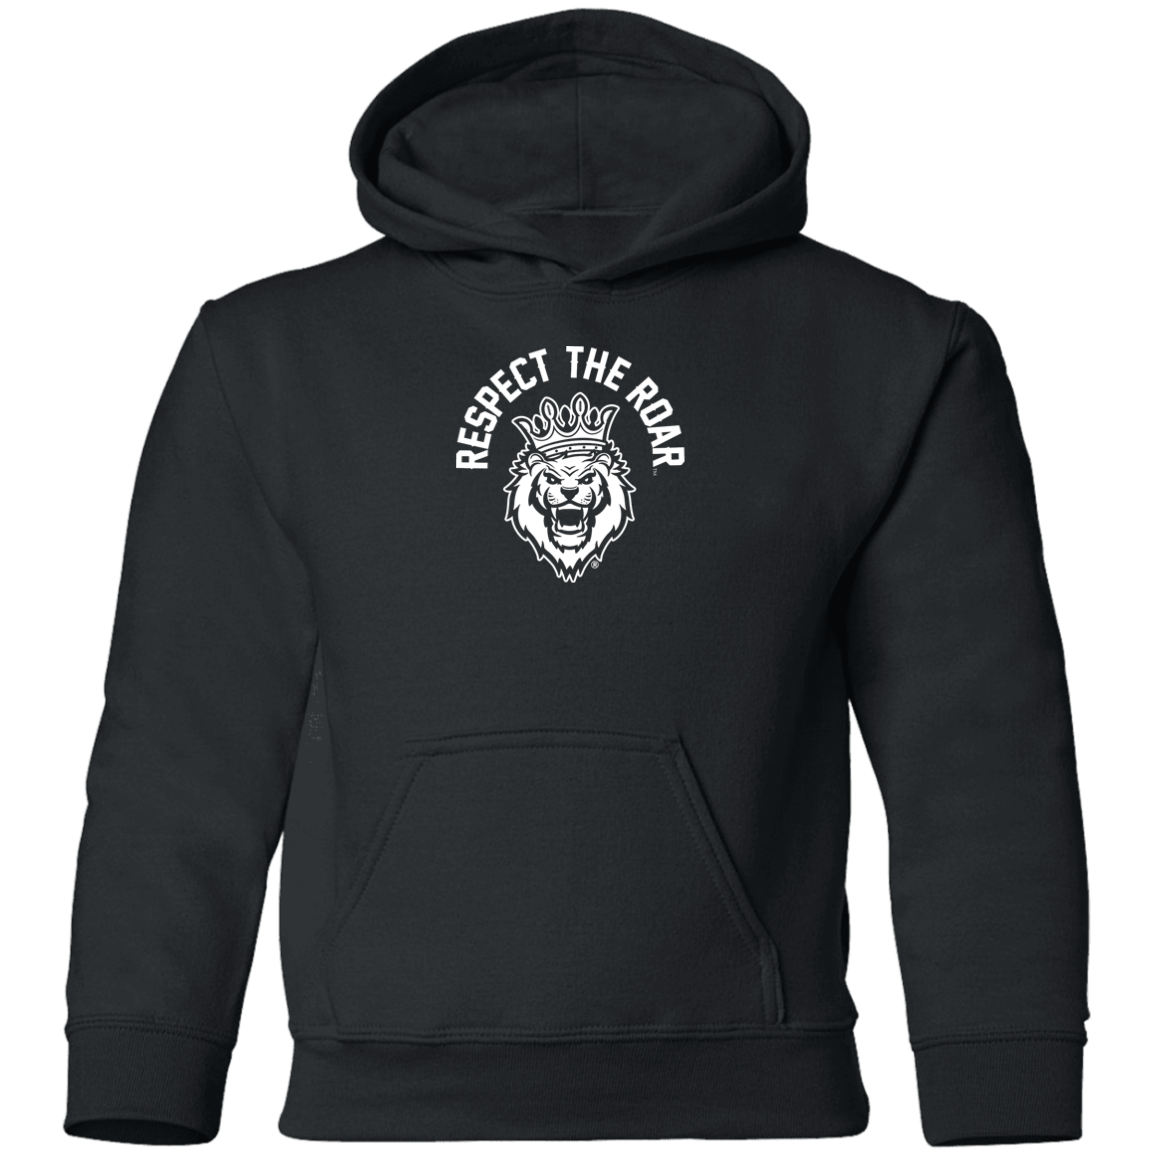 Respect The Roar® Youth Pullover Hoodie